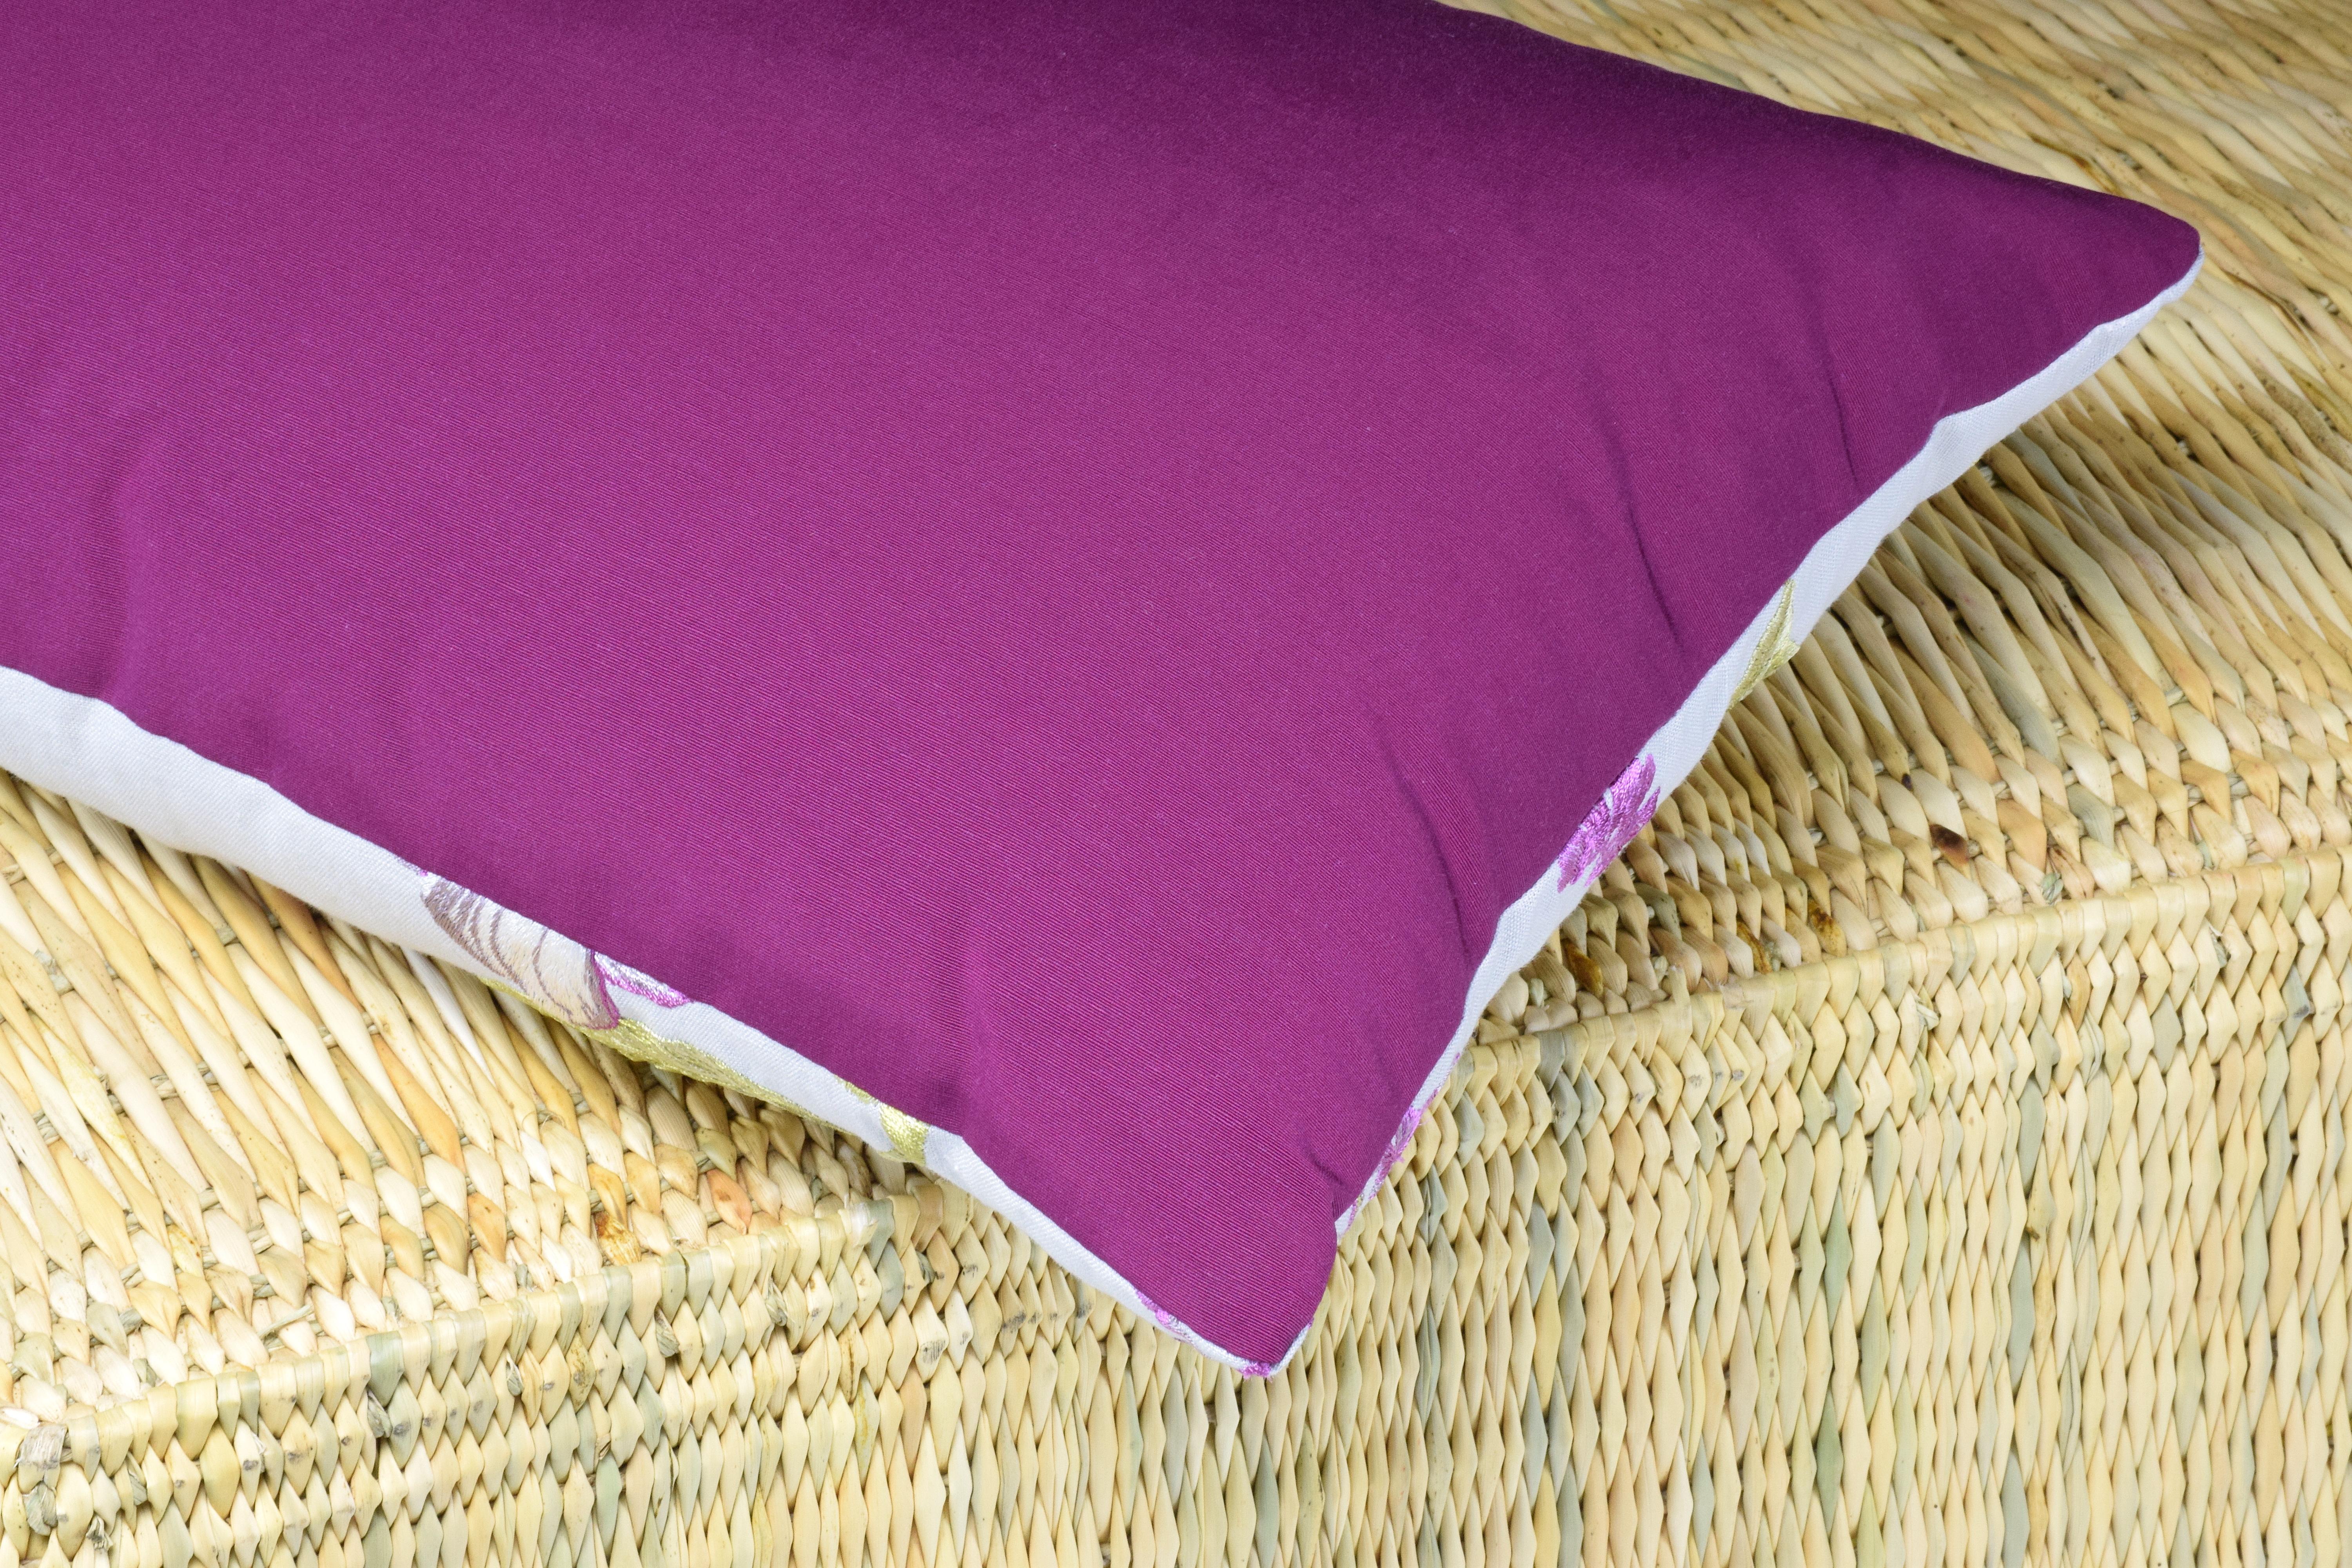 A designer's fabric rectangular cushion made with original French linen fabric. Its floral hand-embroidered patterns, in a vibrant palette of purple and green colors, is with no doubt an enchanting mood setter. The back-side is made of cotton and